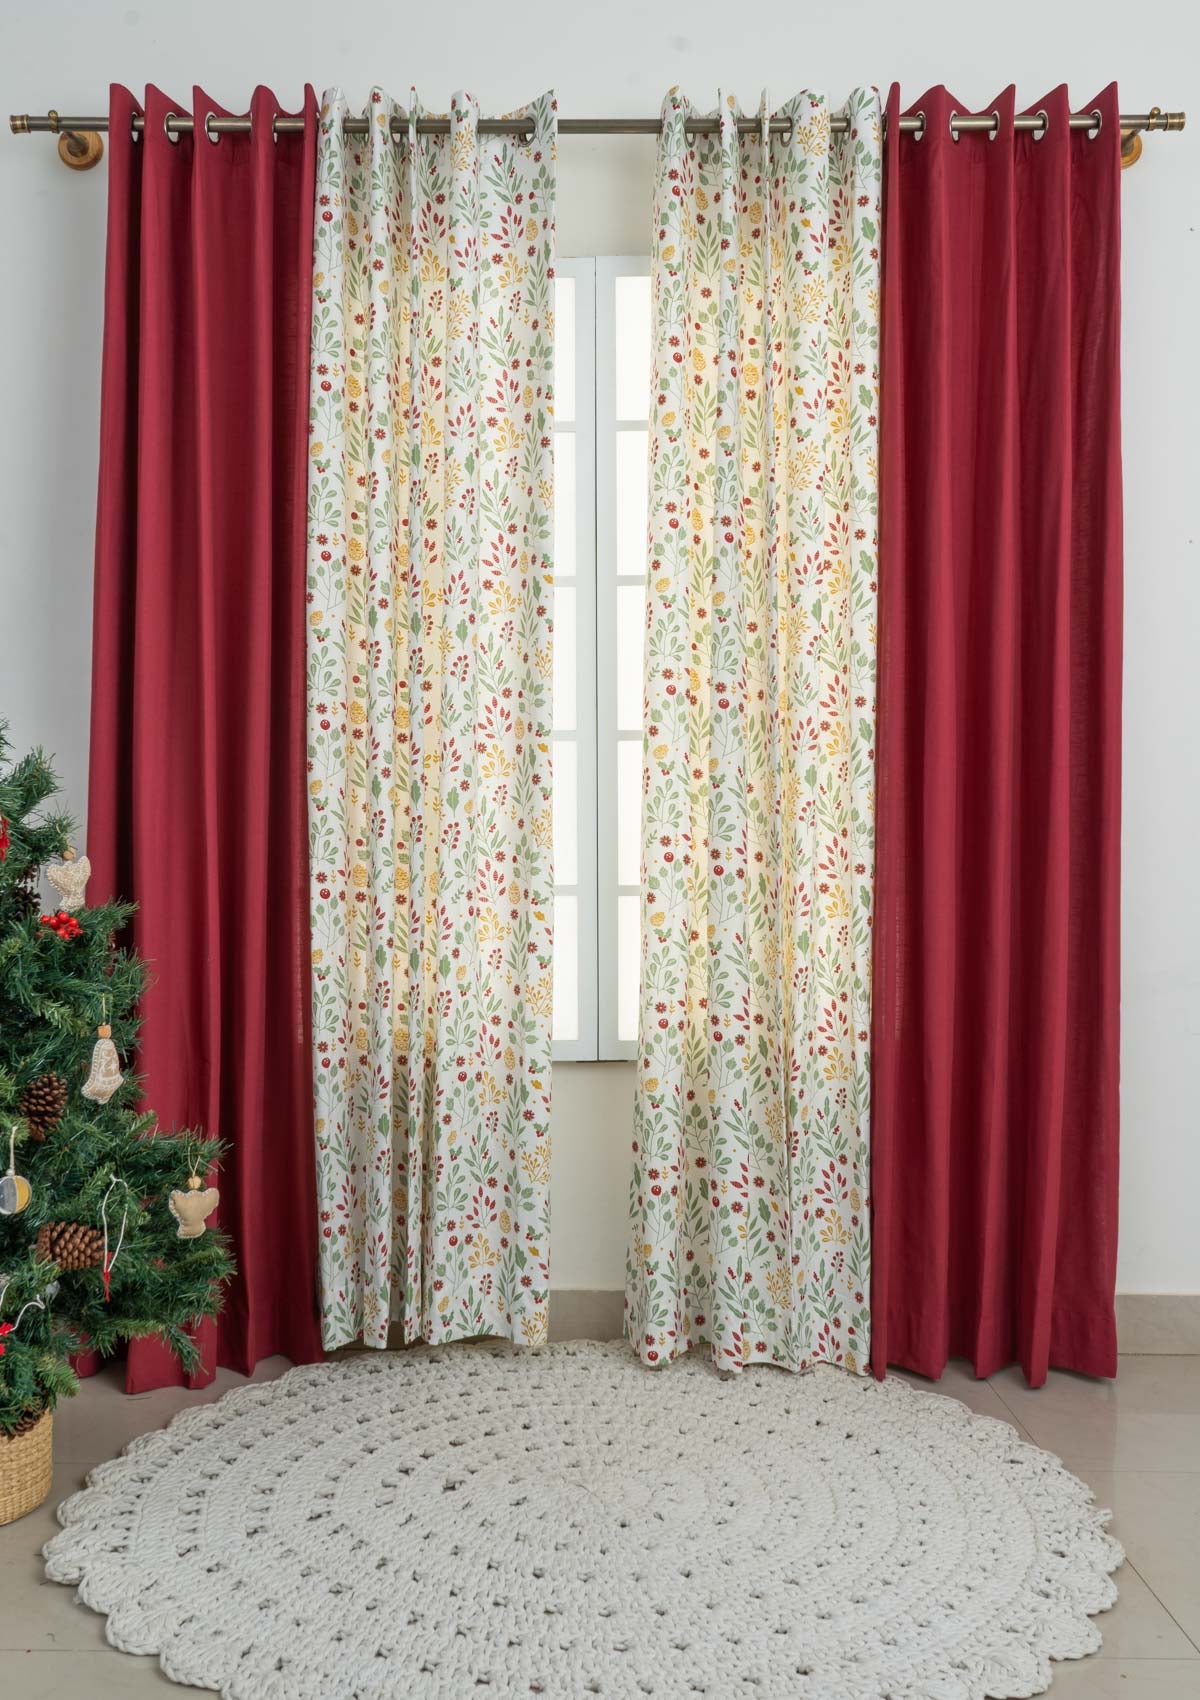 Wine Red with Foraged berries set of 4 cotton Curtain - Multicolor